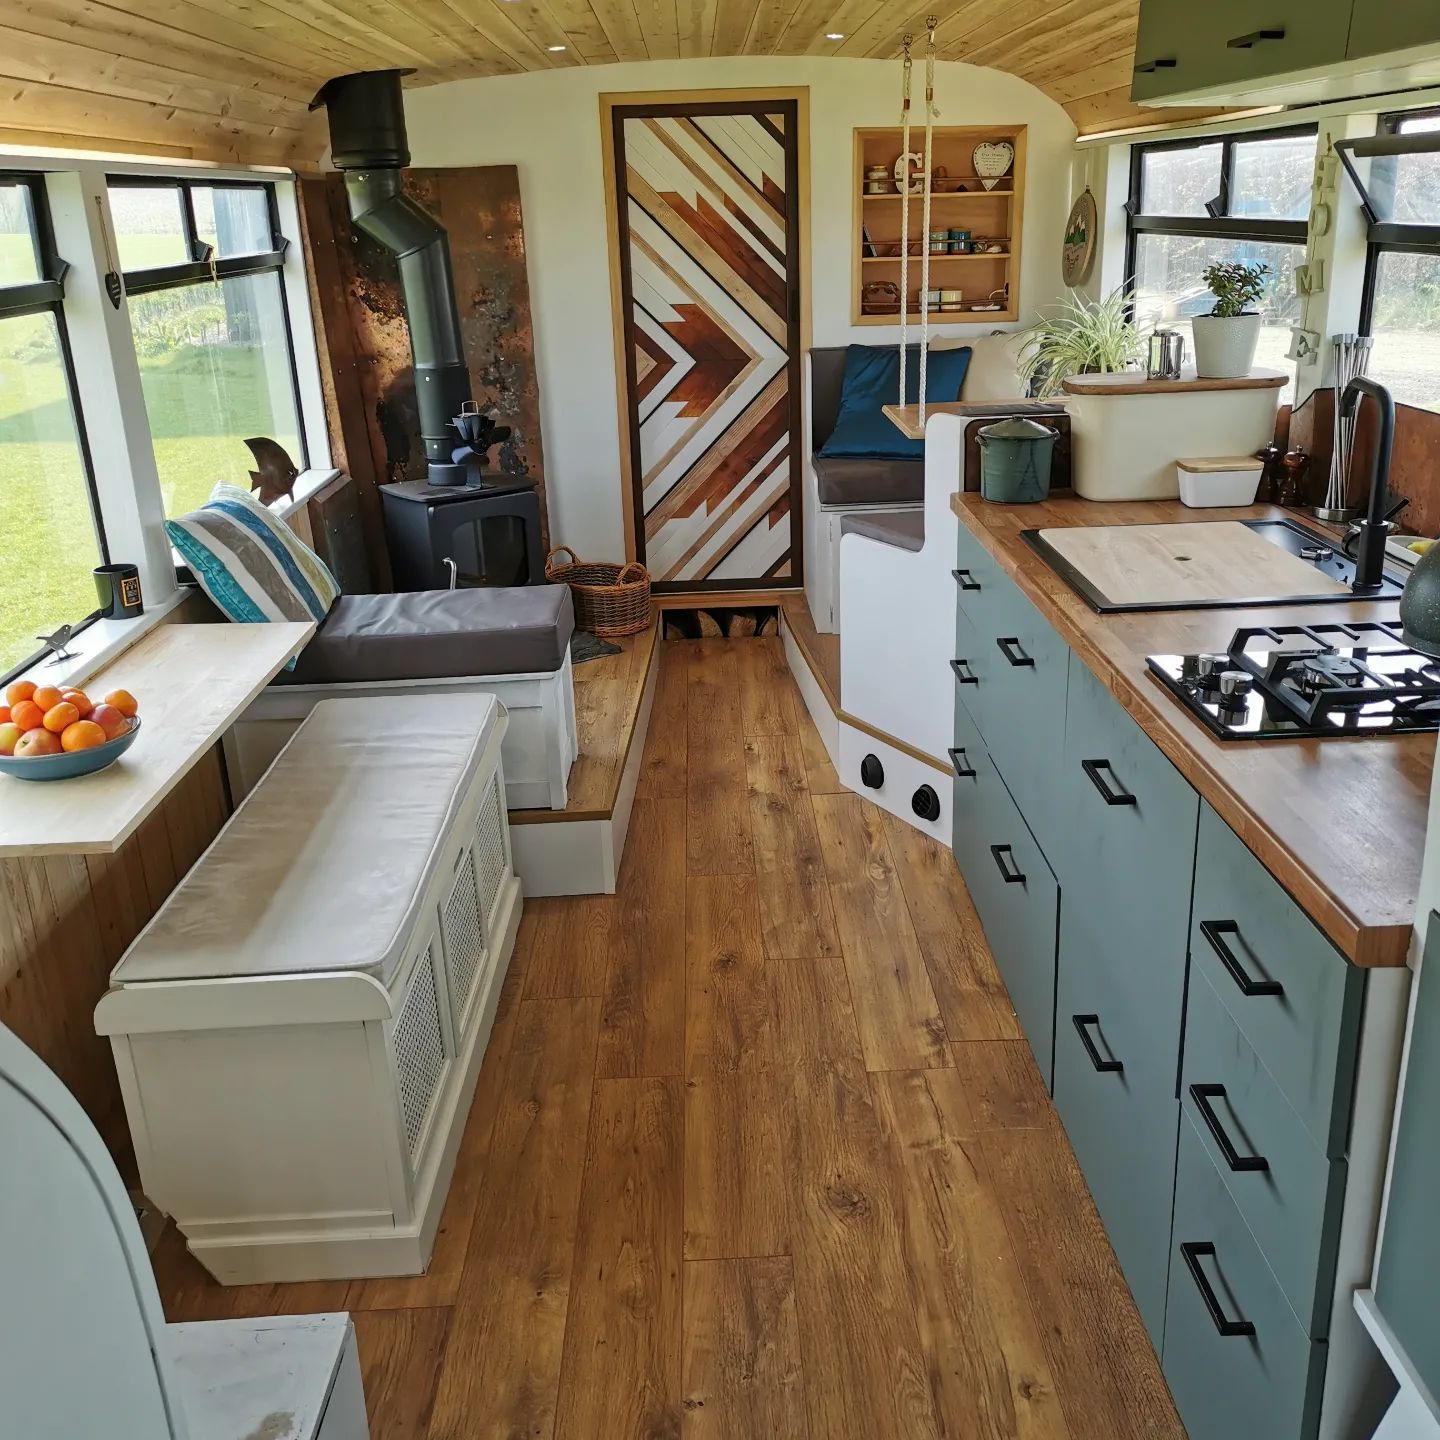 driven to diy: 'we converted a 1997 double decker school bus into an off-grid living space for £28,000'